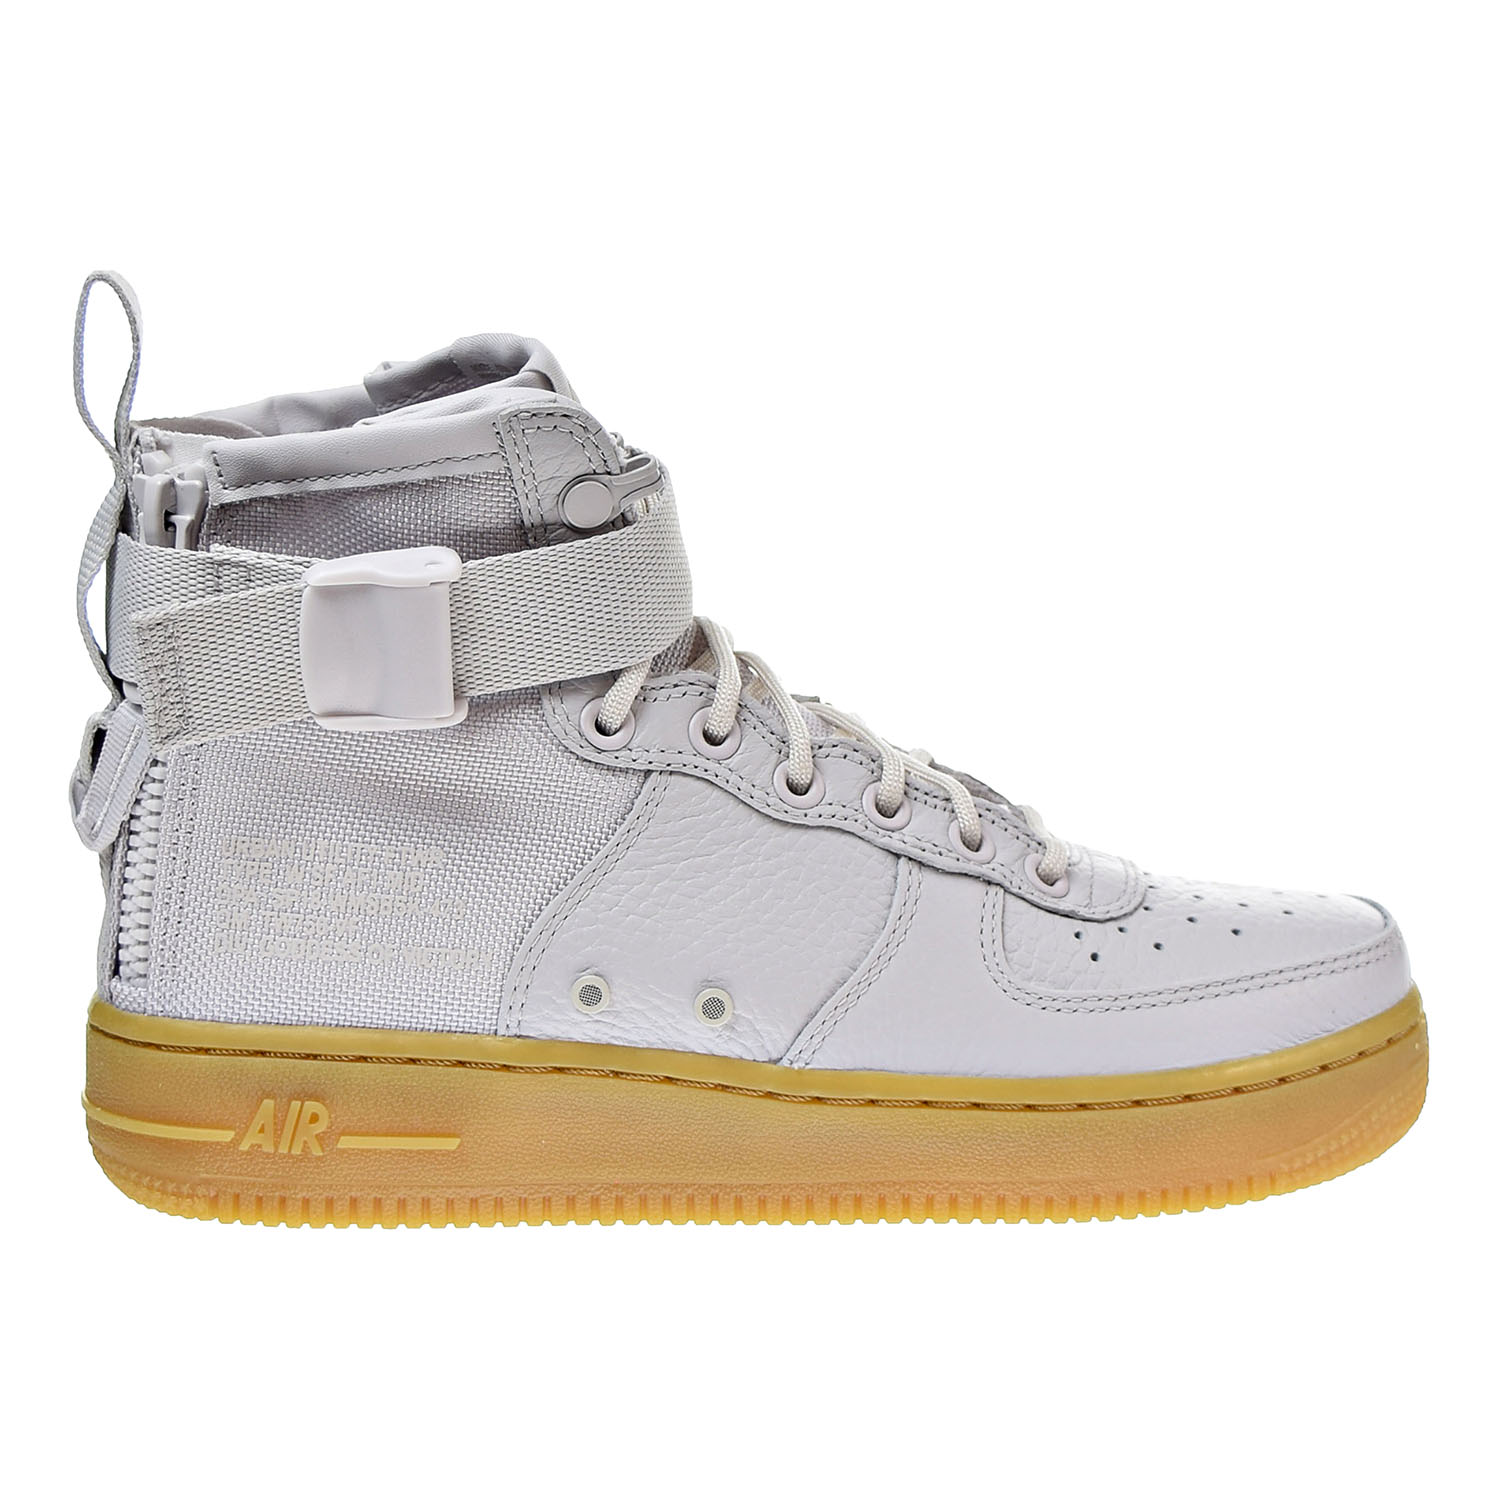 To disable Develop Using a computer Nike Sf Air Force 1 Mid Women's Shoes Vast Grey aa3966-005 (10 B(M) US)